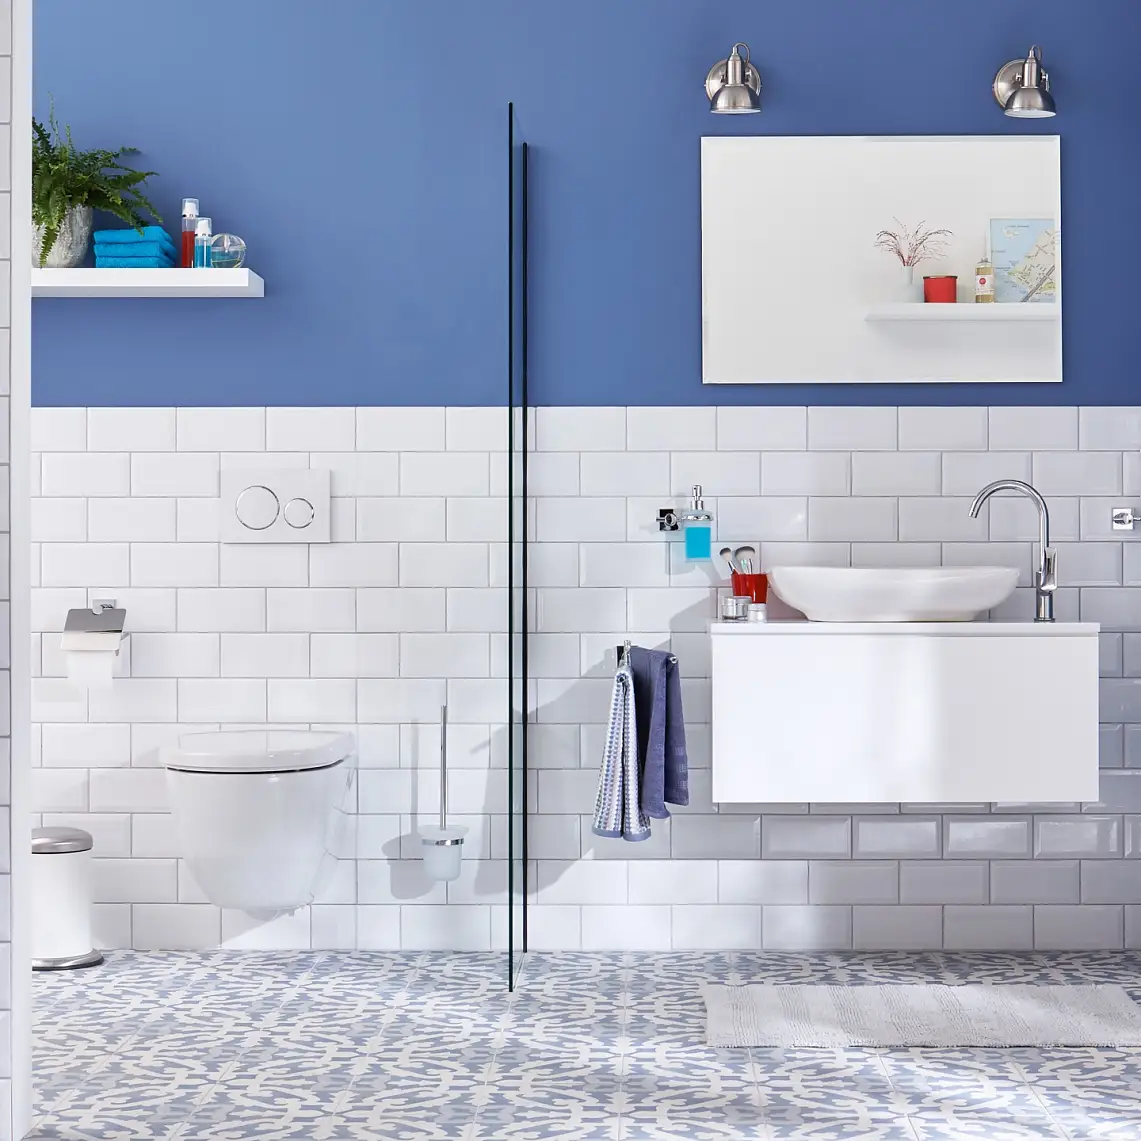 Beauty meets confidence to cover your bathroom needs.